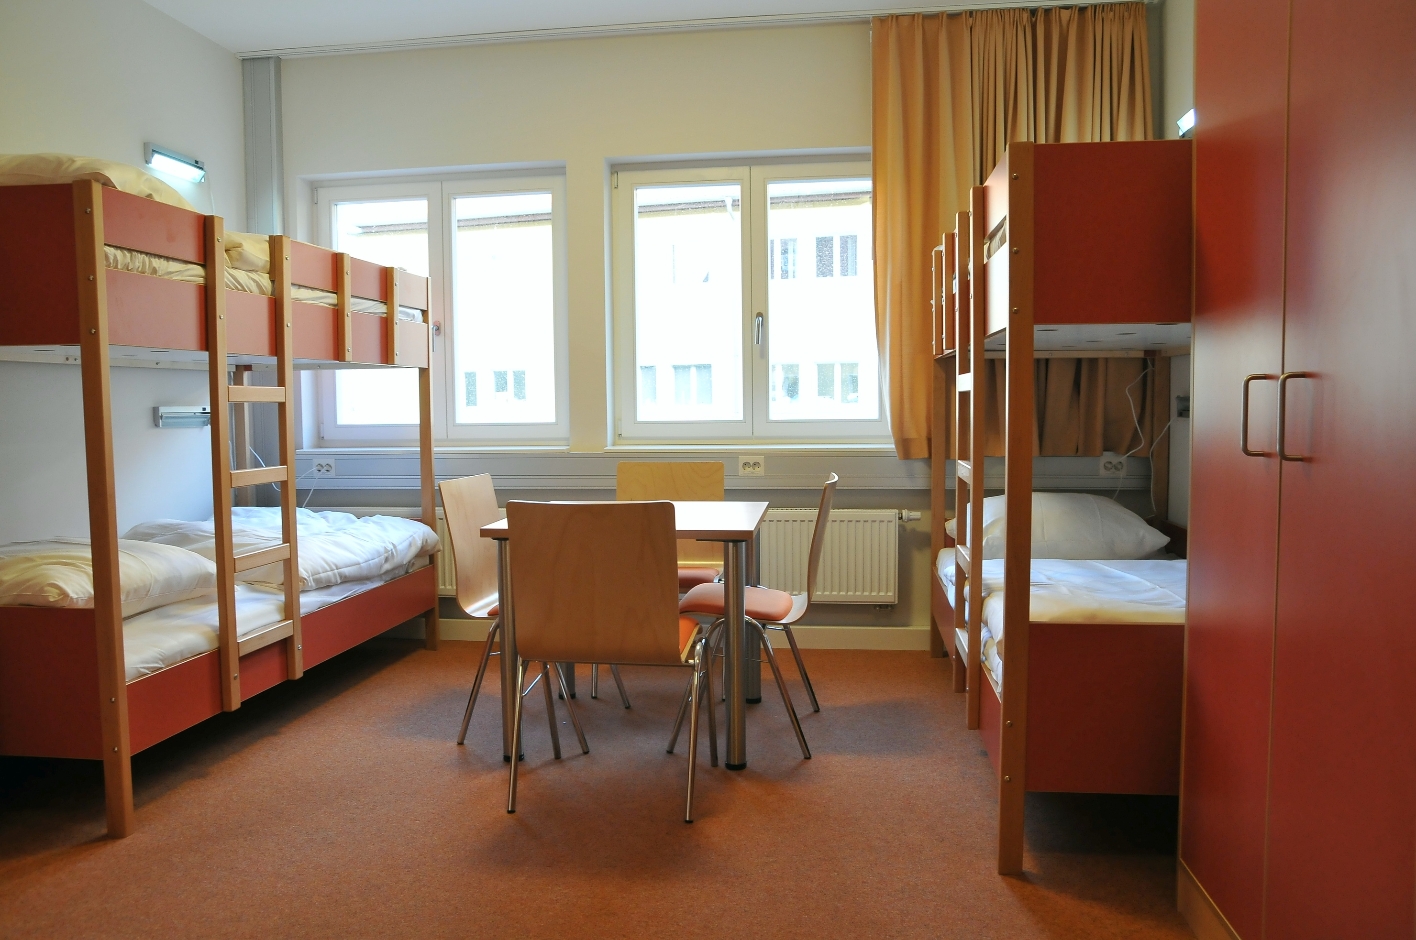 A guest room in the International Youth Meeting Center. To the left and right of the wall are two double bunk beds, in the middle a table with four chairs, behind them are several windows.